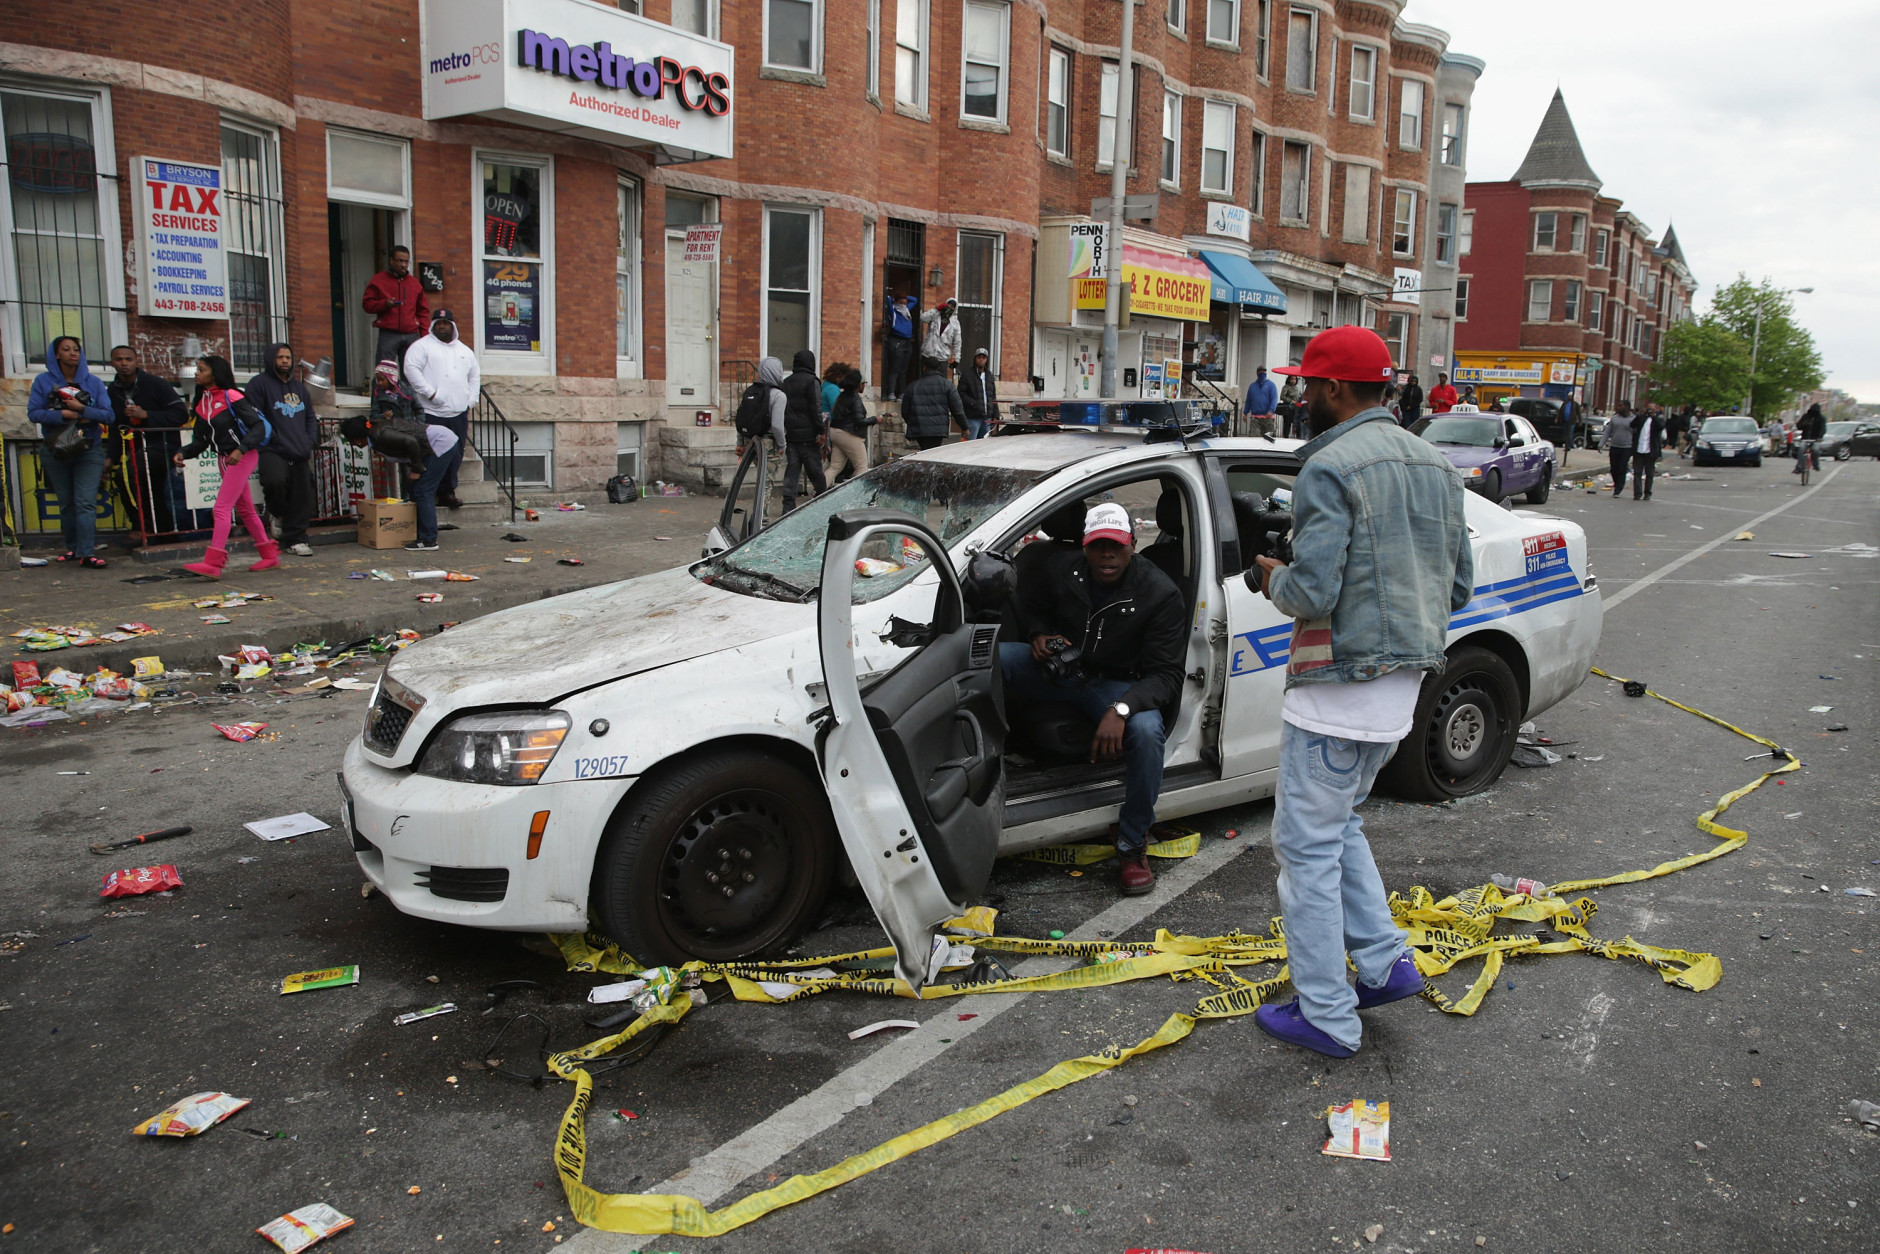 BALTIMORE, MD - APRIL 27: A Baltimore Police car destroyed by demonstrators sits in the street near the corner of Pennsylvania and North avenues during violent protests following the funeral of Freddie Gray April 27, 2015 in Baltimore, Maryland. Gray, 25, who was arrested for possessing a switch blade knife April 12 outside the Gilmor Homes housing project on Baltimore's west side. According to his attorney, Gray died a week later in the hospital from a severe spinal cord injury he received while in police custody. (Photo by Chip Somodevilla/Getty Images)